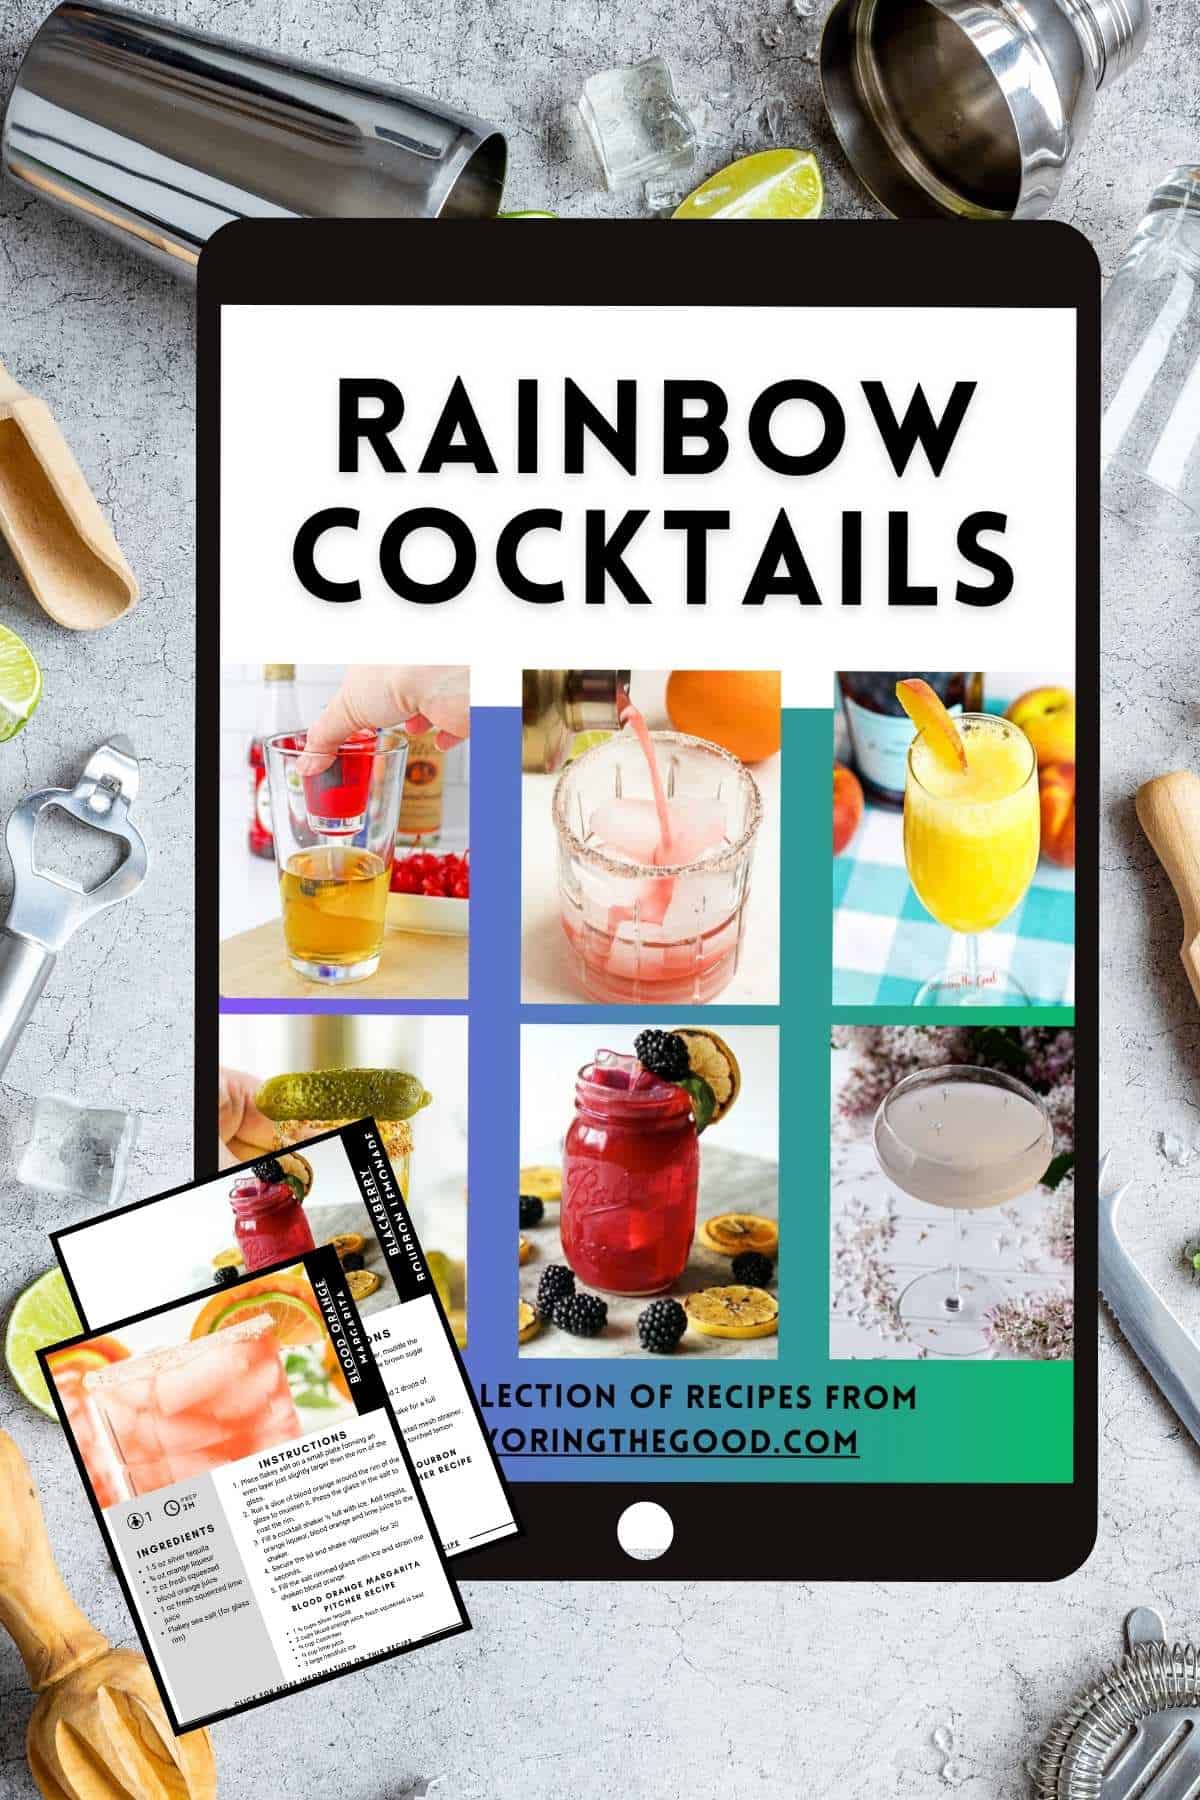 A vibrant collection of images showcasing colorful rainbow cocktails.